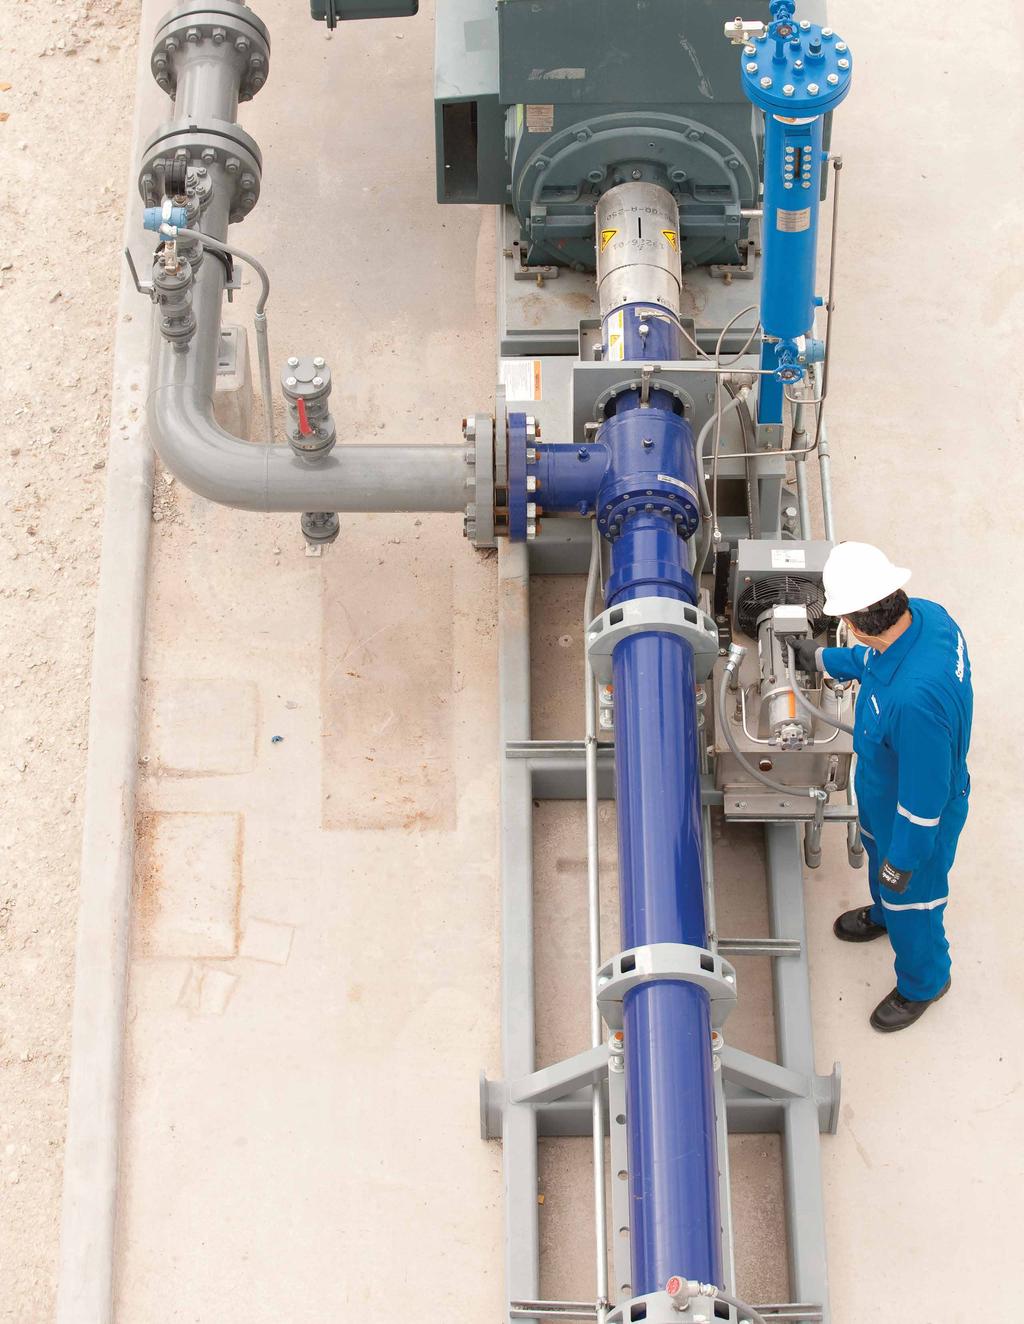 Reliable Design, Flexible Operation The REDA HPS system incorporates flexible features and API 610 designs that maximize overall pump run life and minimize downtime.